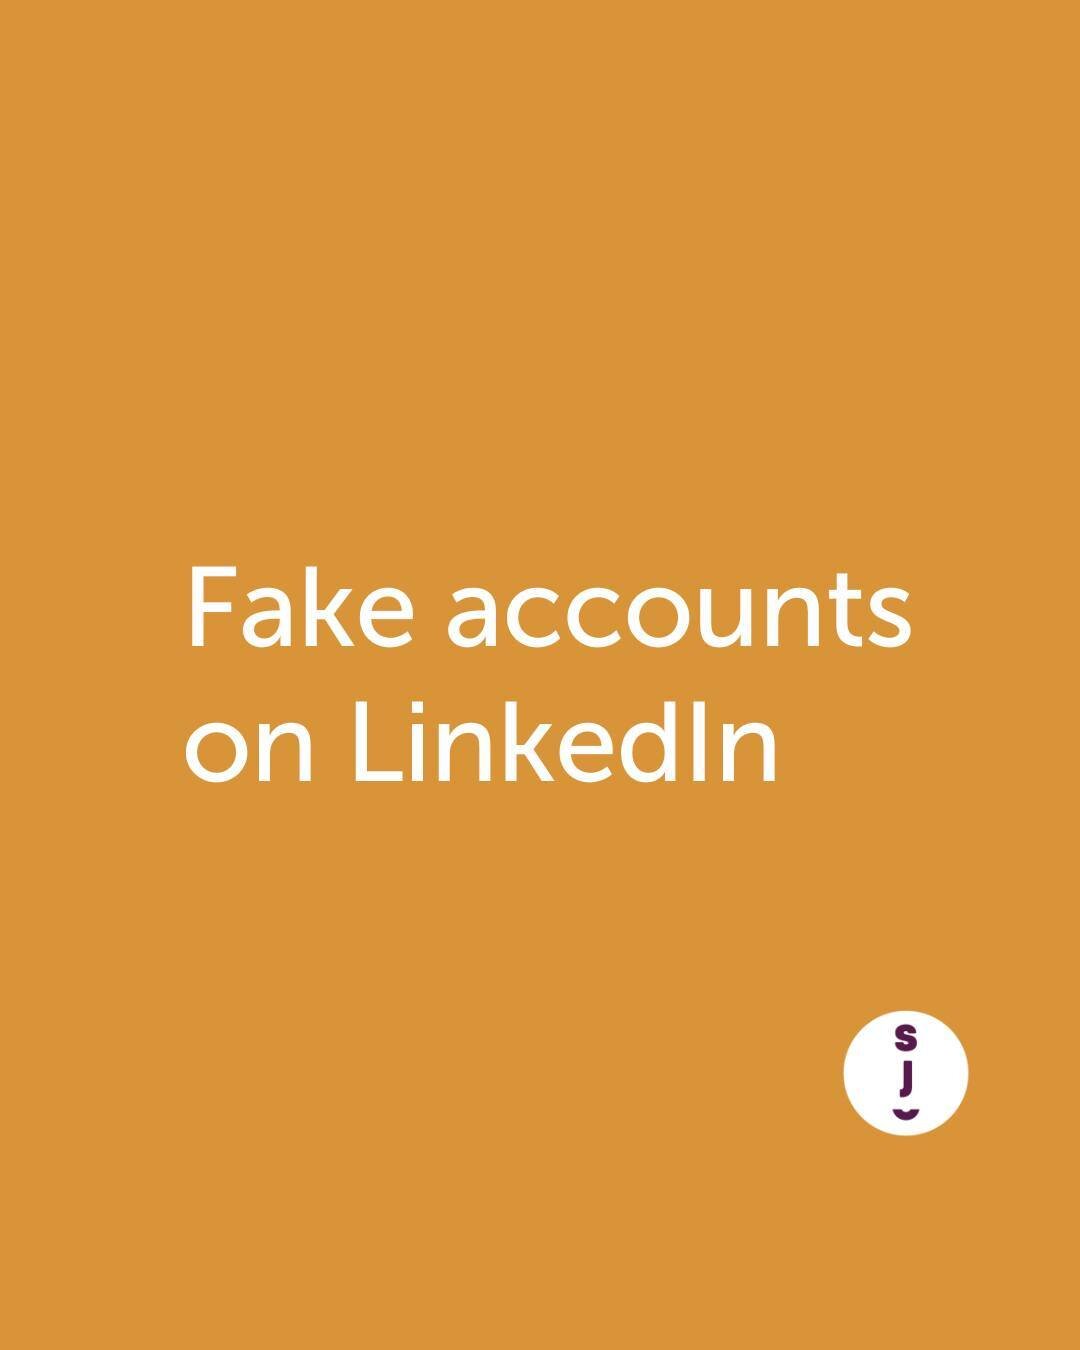 🚨Fake accounts on LinkedIn🚨⁠
⁠
Are you receiving many connection requests from people whose accounts look dodgy? Have they set up an account with no photos, random names, or job titles?⁠
⁠
Here are a few ways you can spot fake accounts:⁠
⁠
👉 There